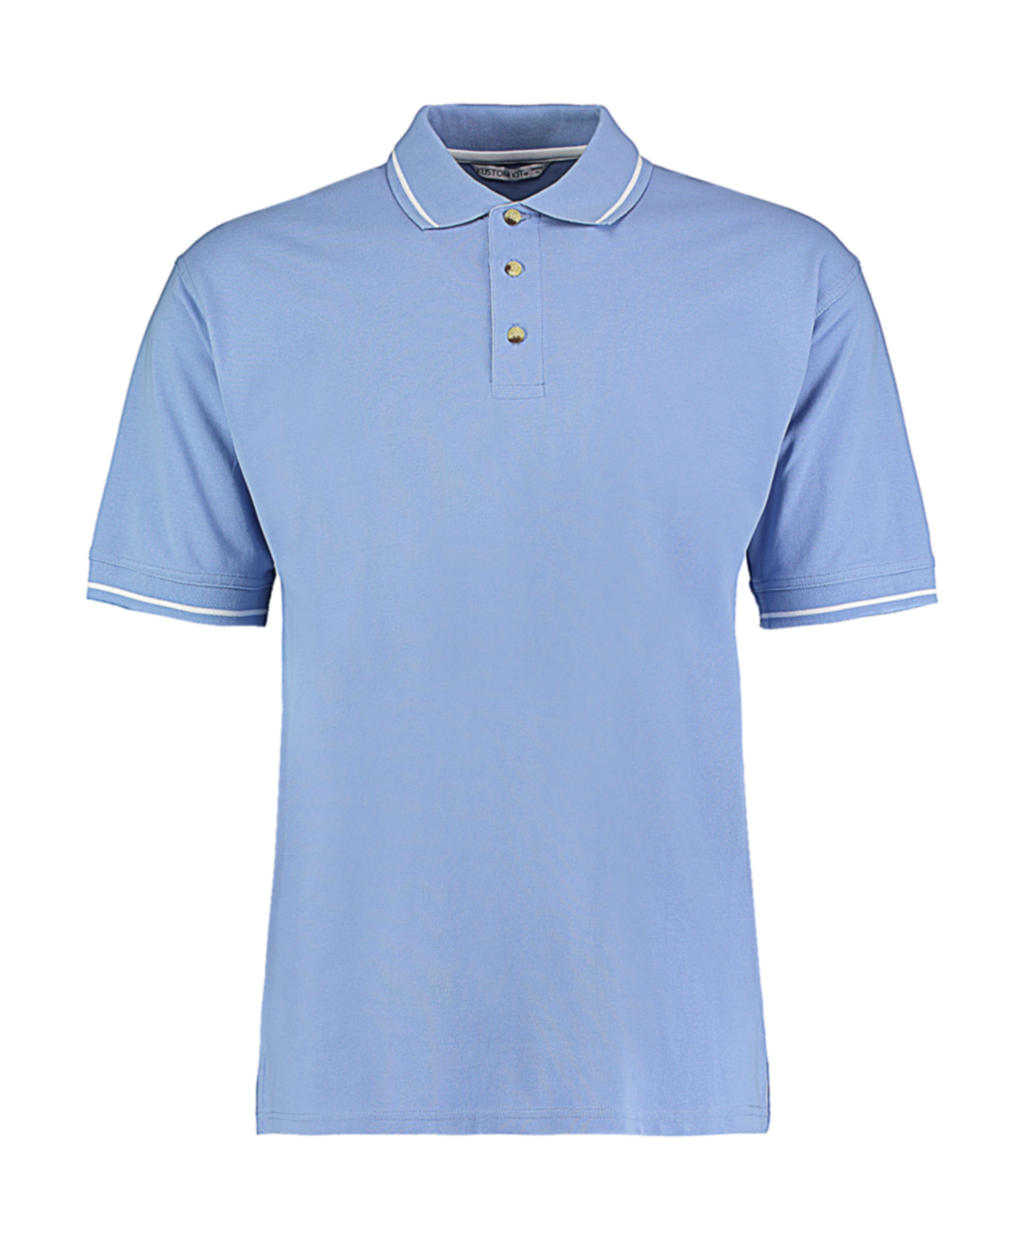  Mens Classic Fit St. Mellion Polo in Farbe Light Blue/White